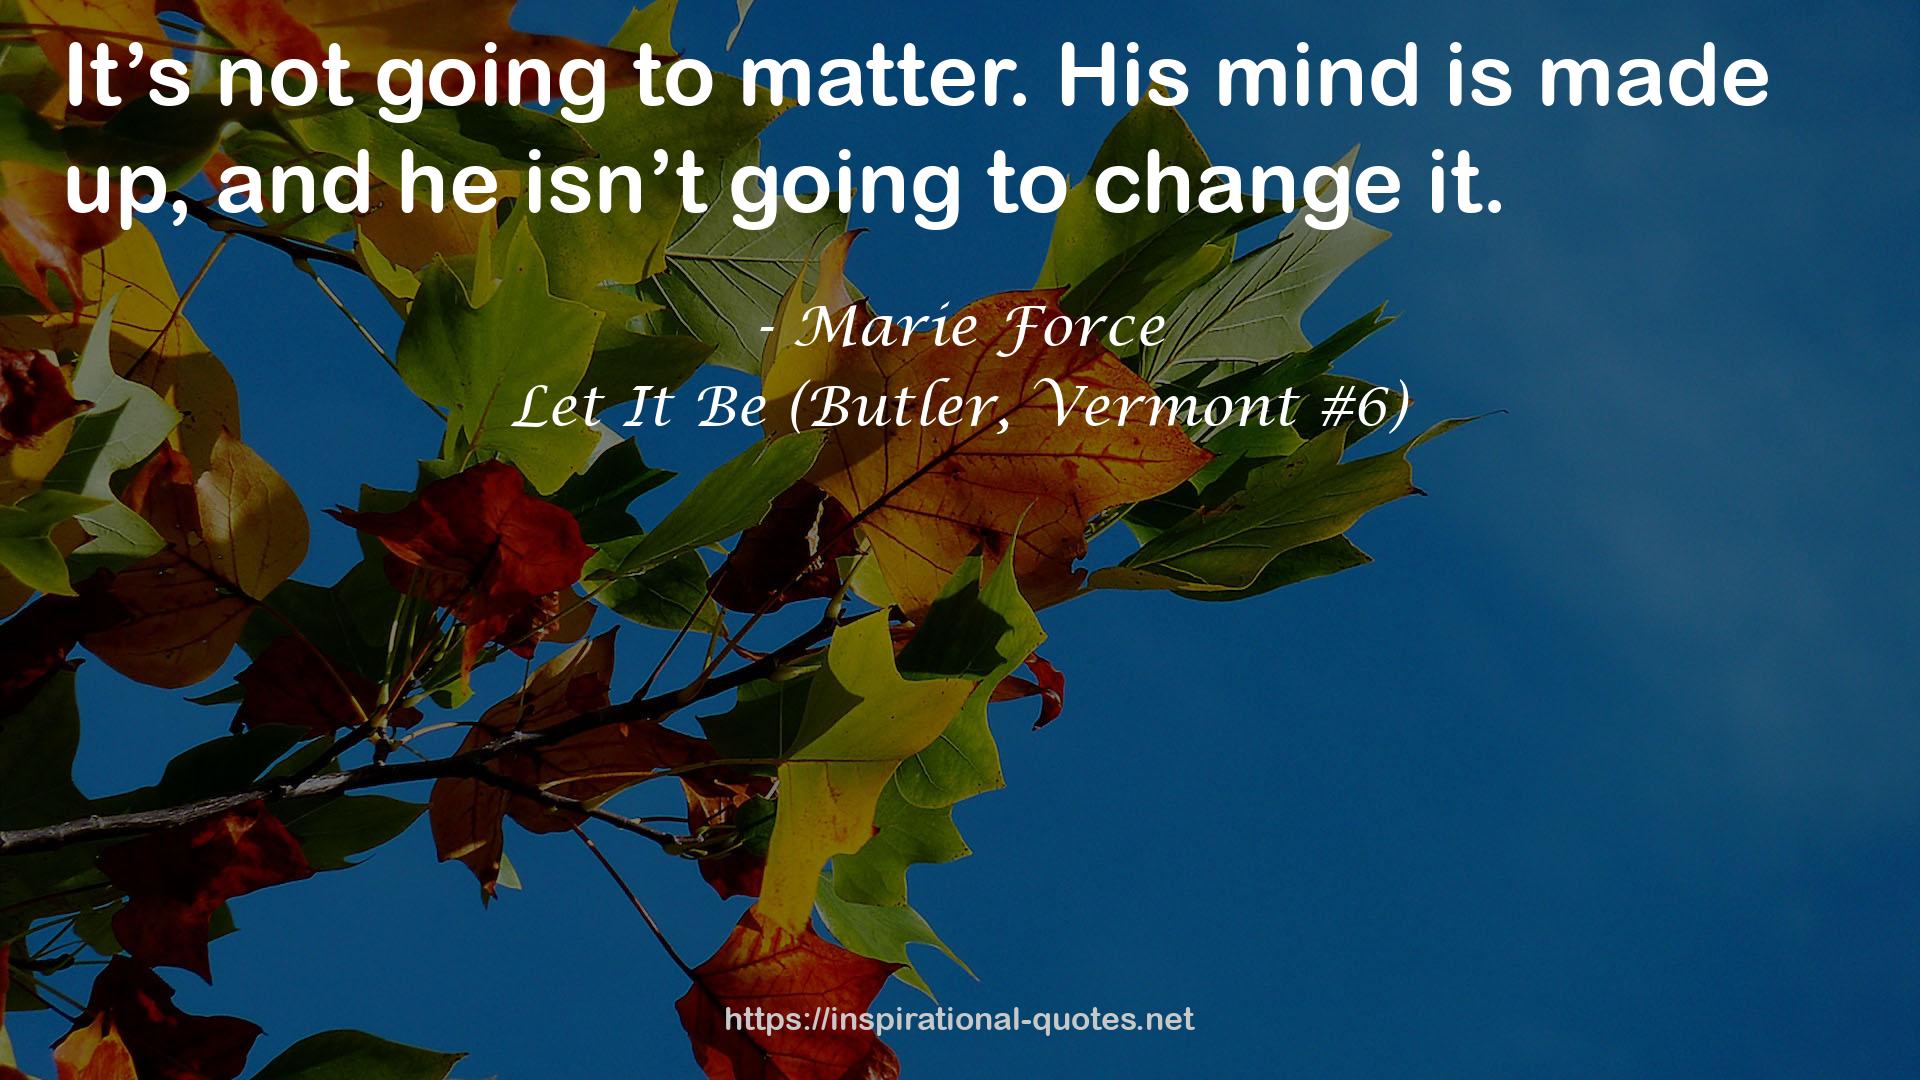 Let It Be (Butler, Vermont #6) QUOTES